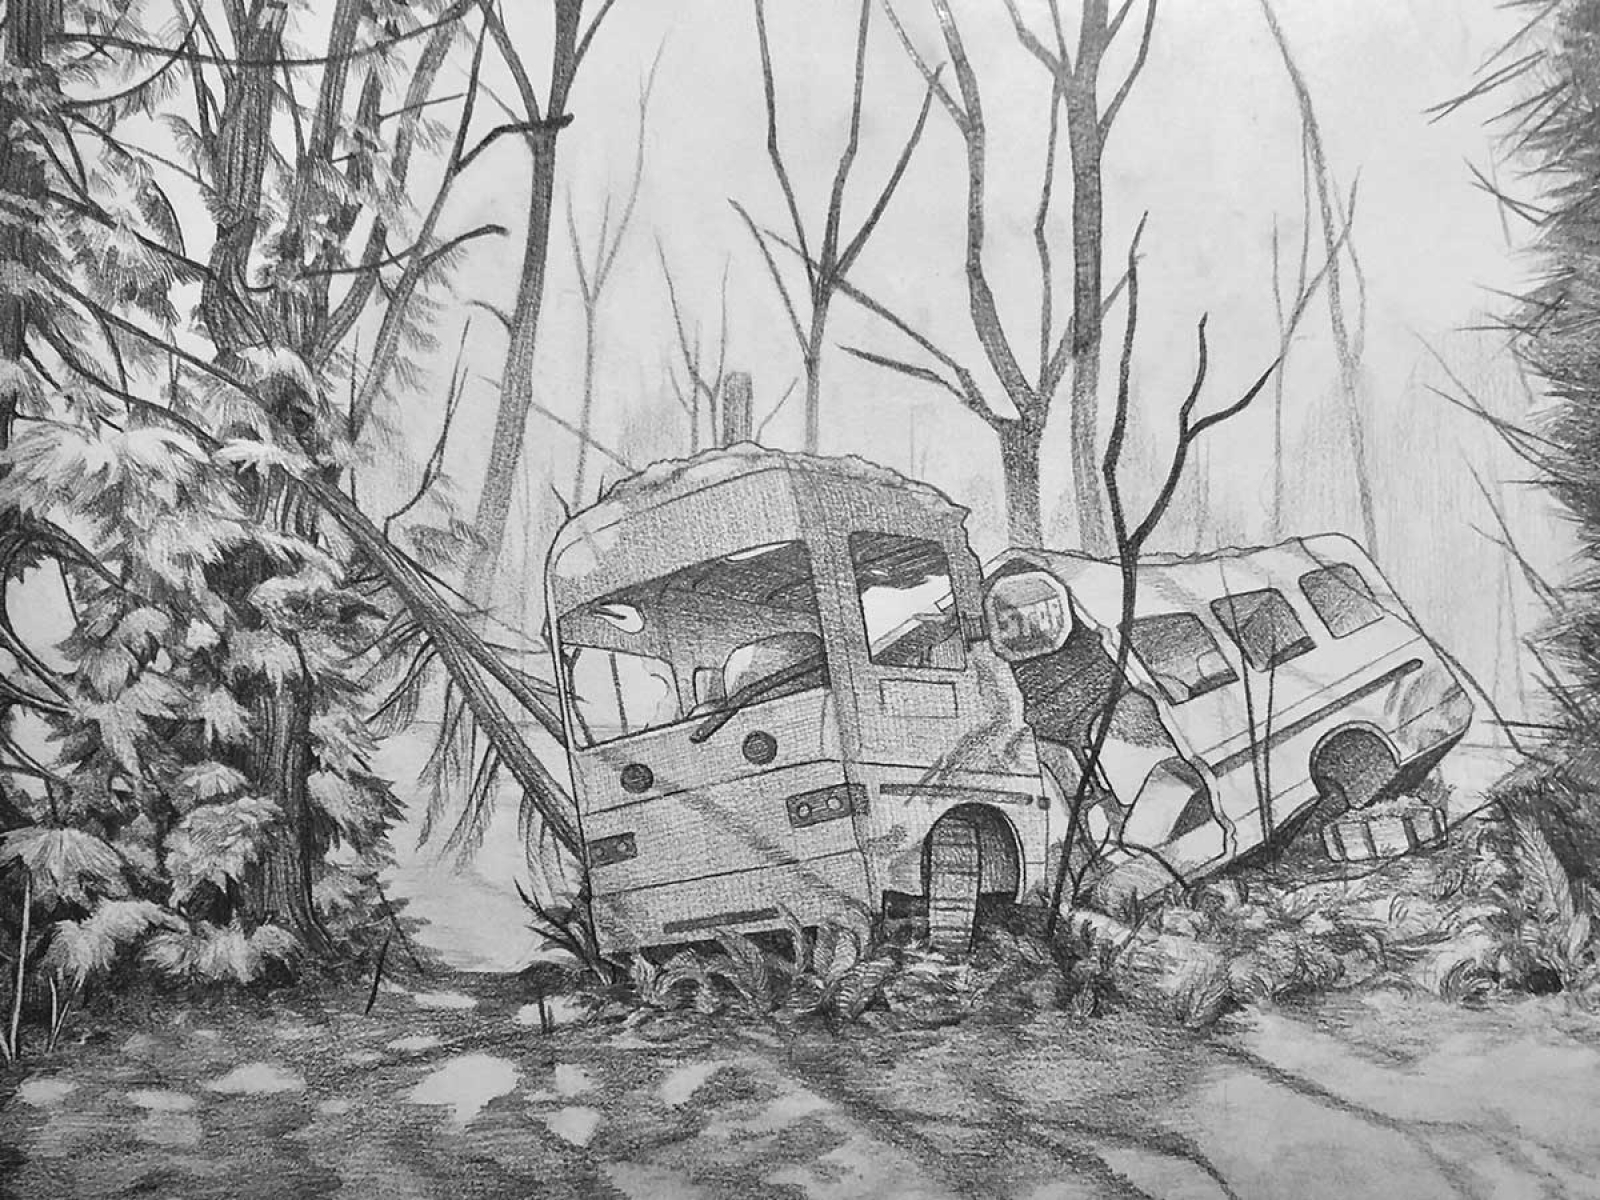 A drawing of a crashed and abandoned school bus in a wooded area.